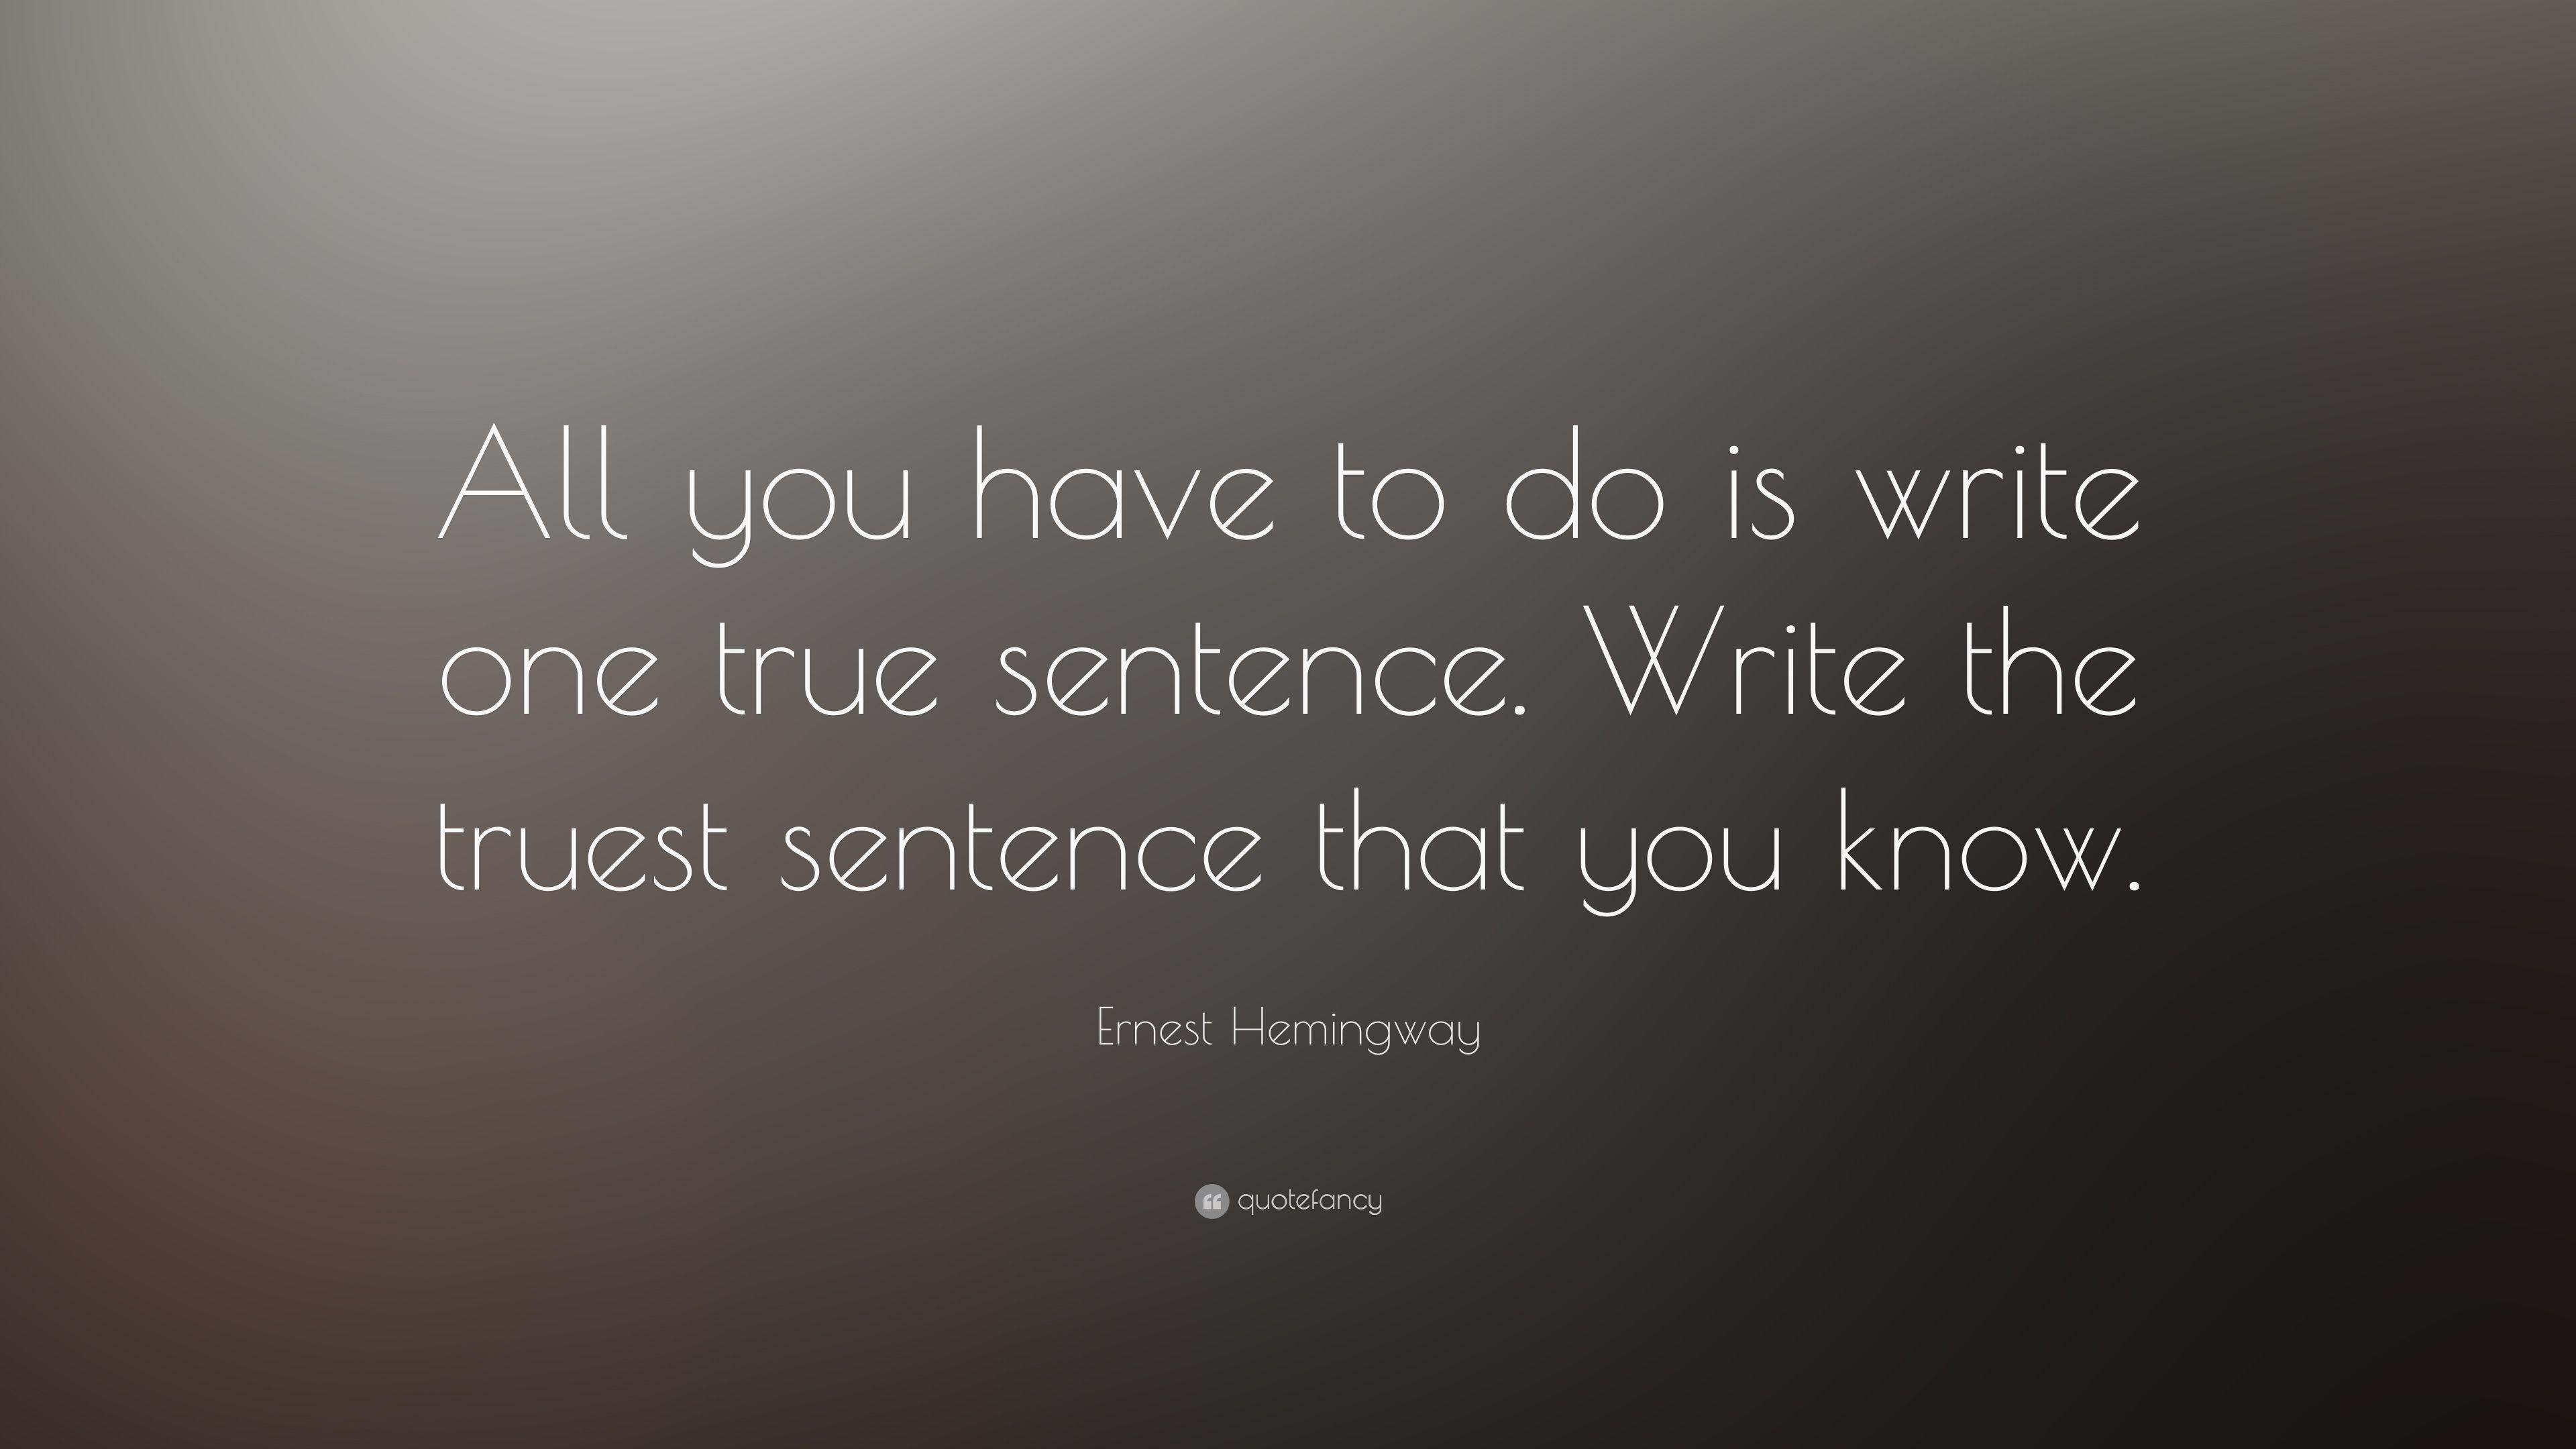 Ernest Hemingway Quote: “All you have to do is write one true